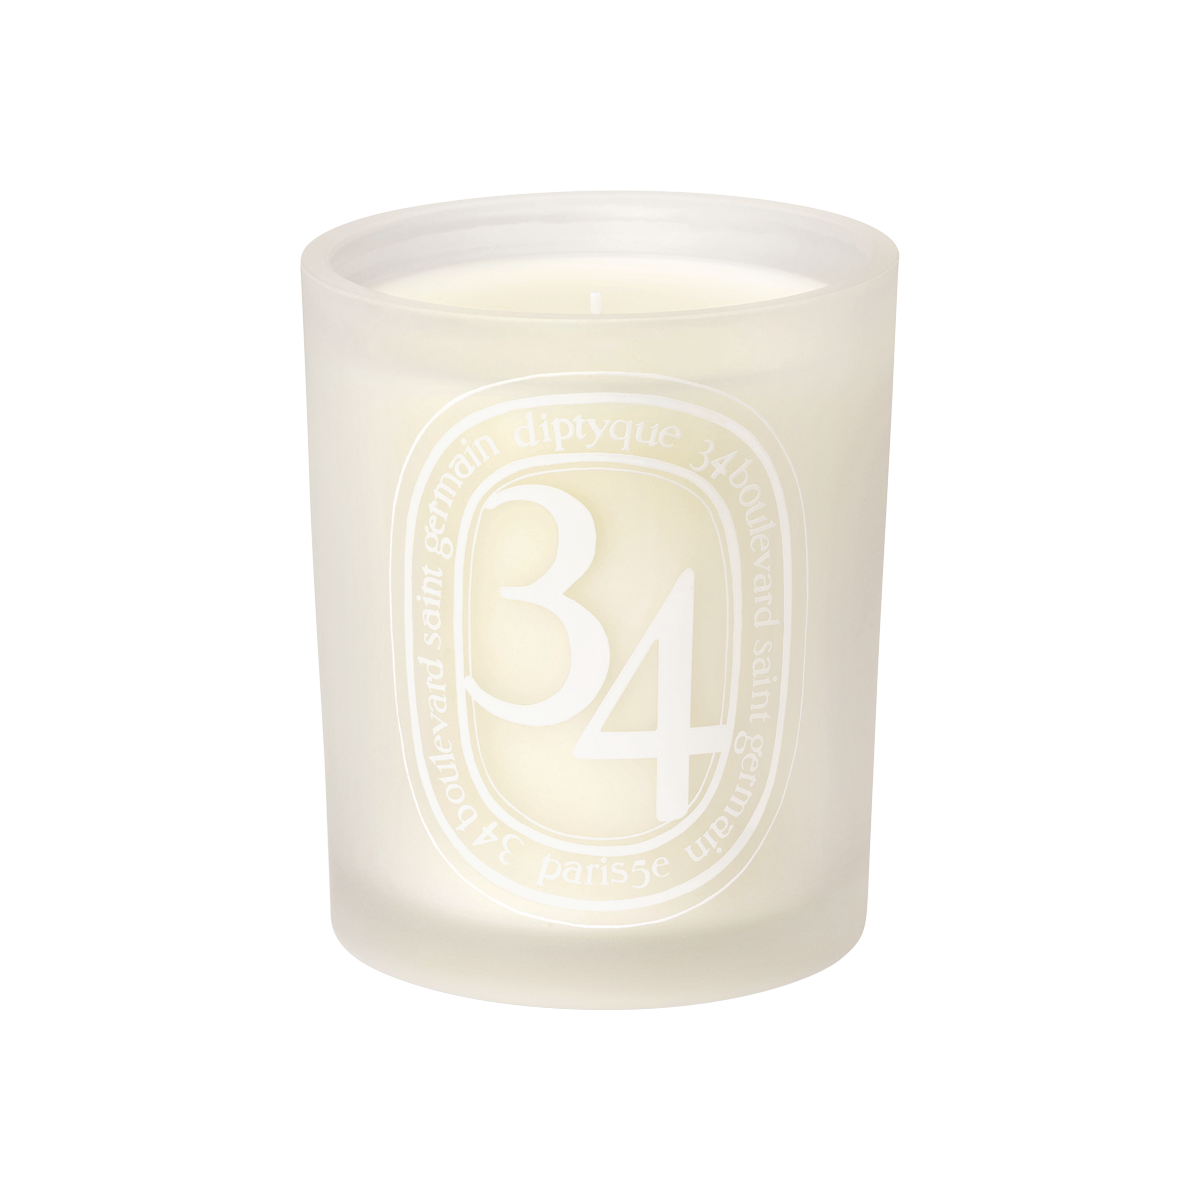 Diptyque - 34 Blvd Saint Germain Scented Candle